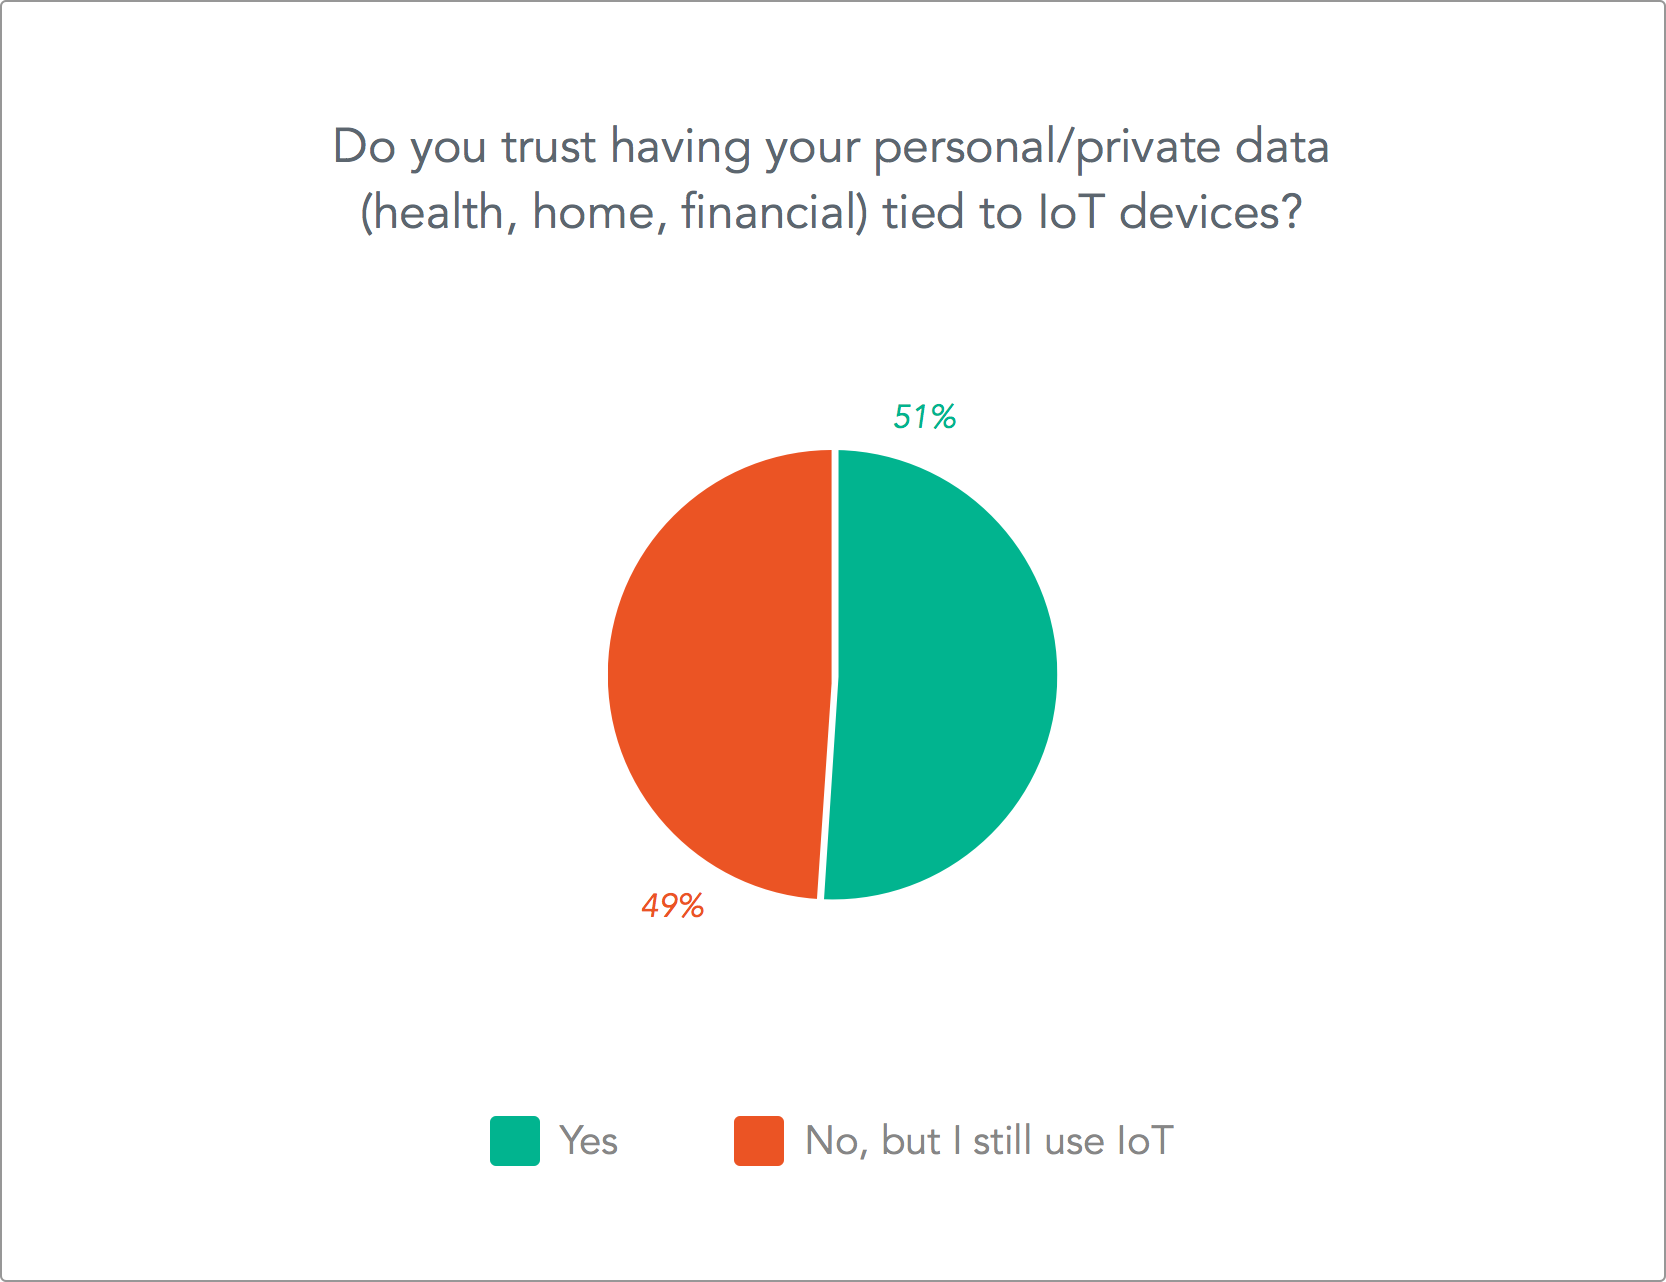 Do you trust your personal data to IoT devices